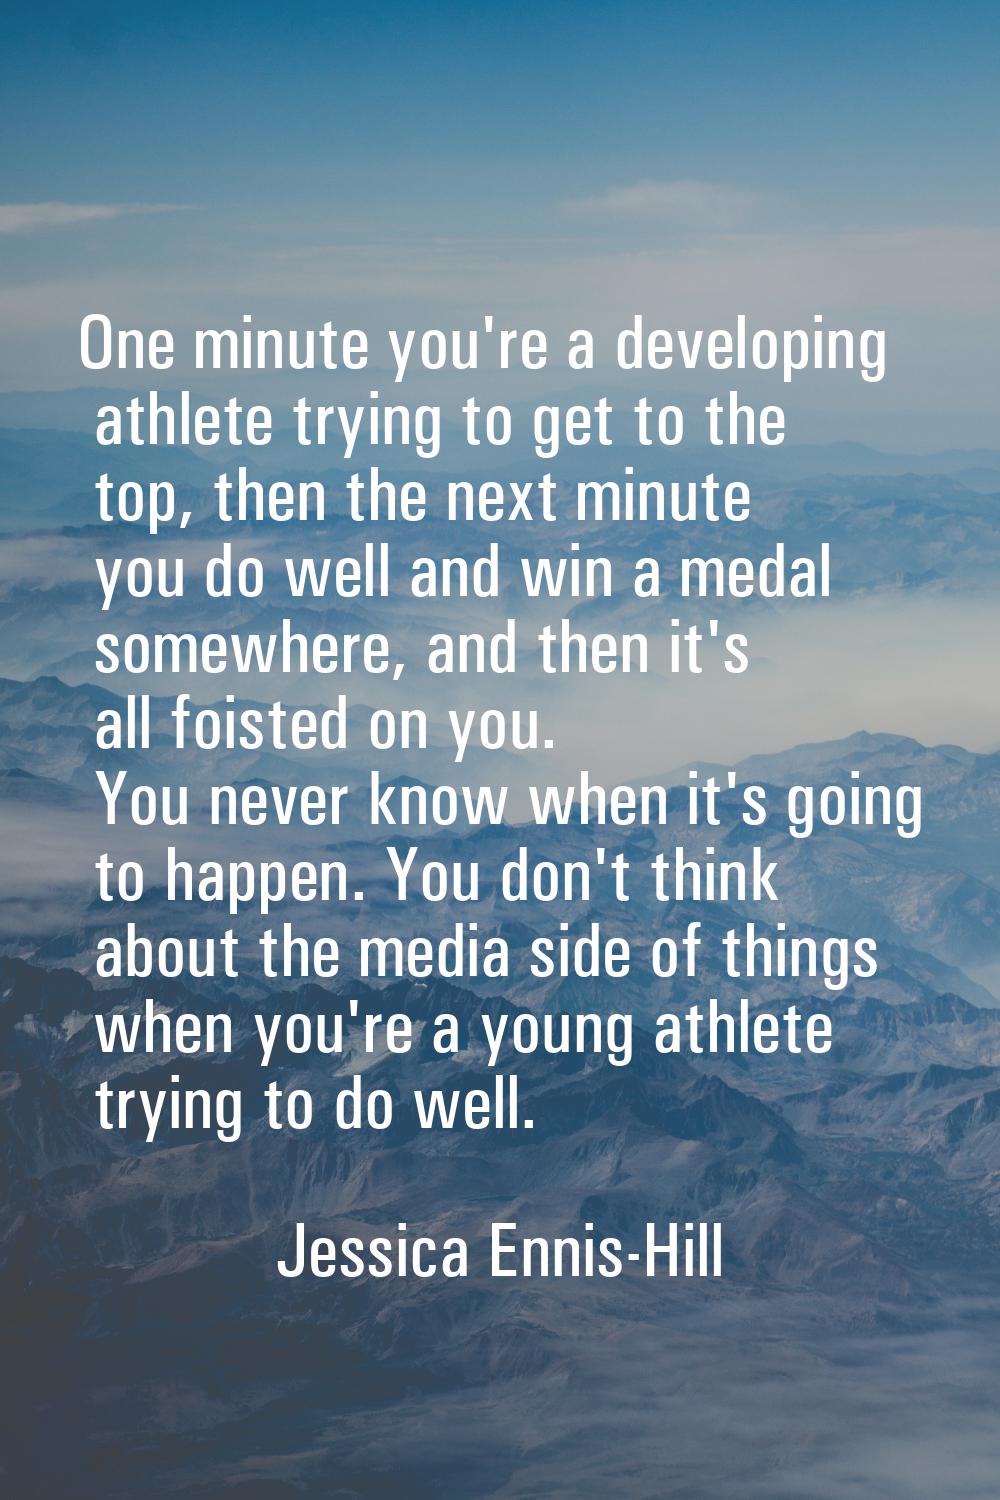 One minute you're a developing athlete trying to get to the top, then the next minute you do well a